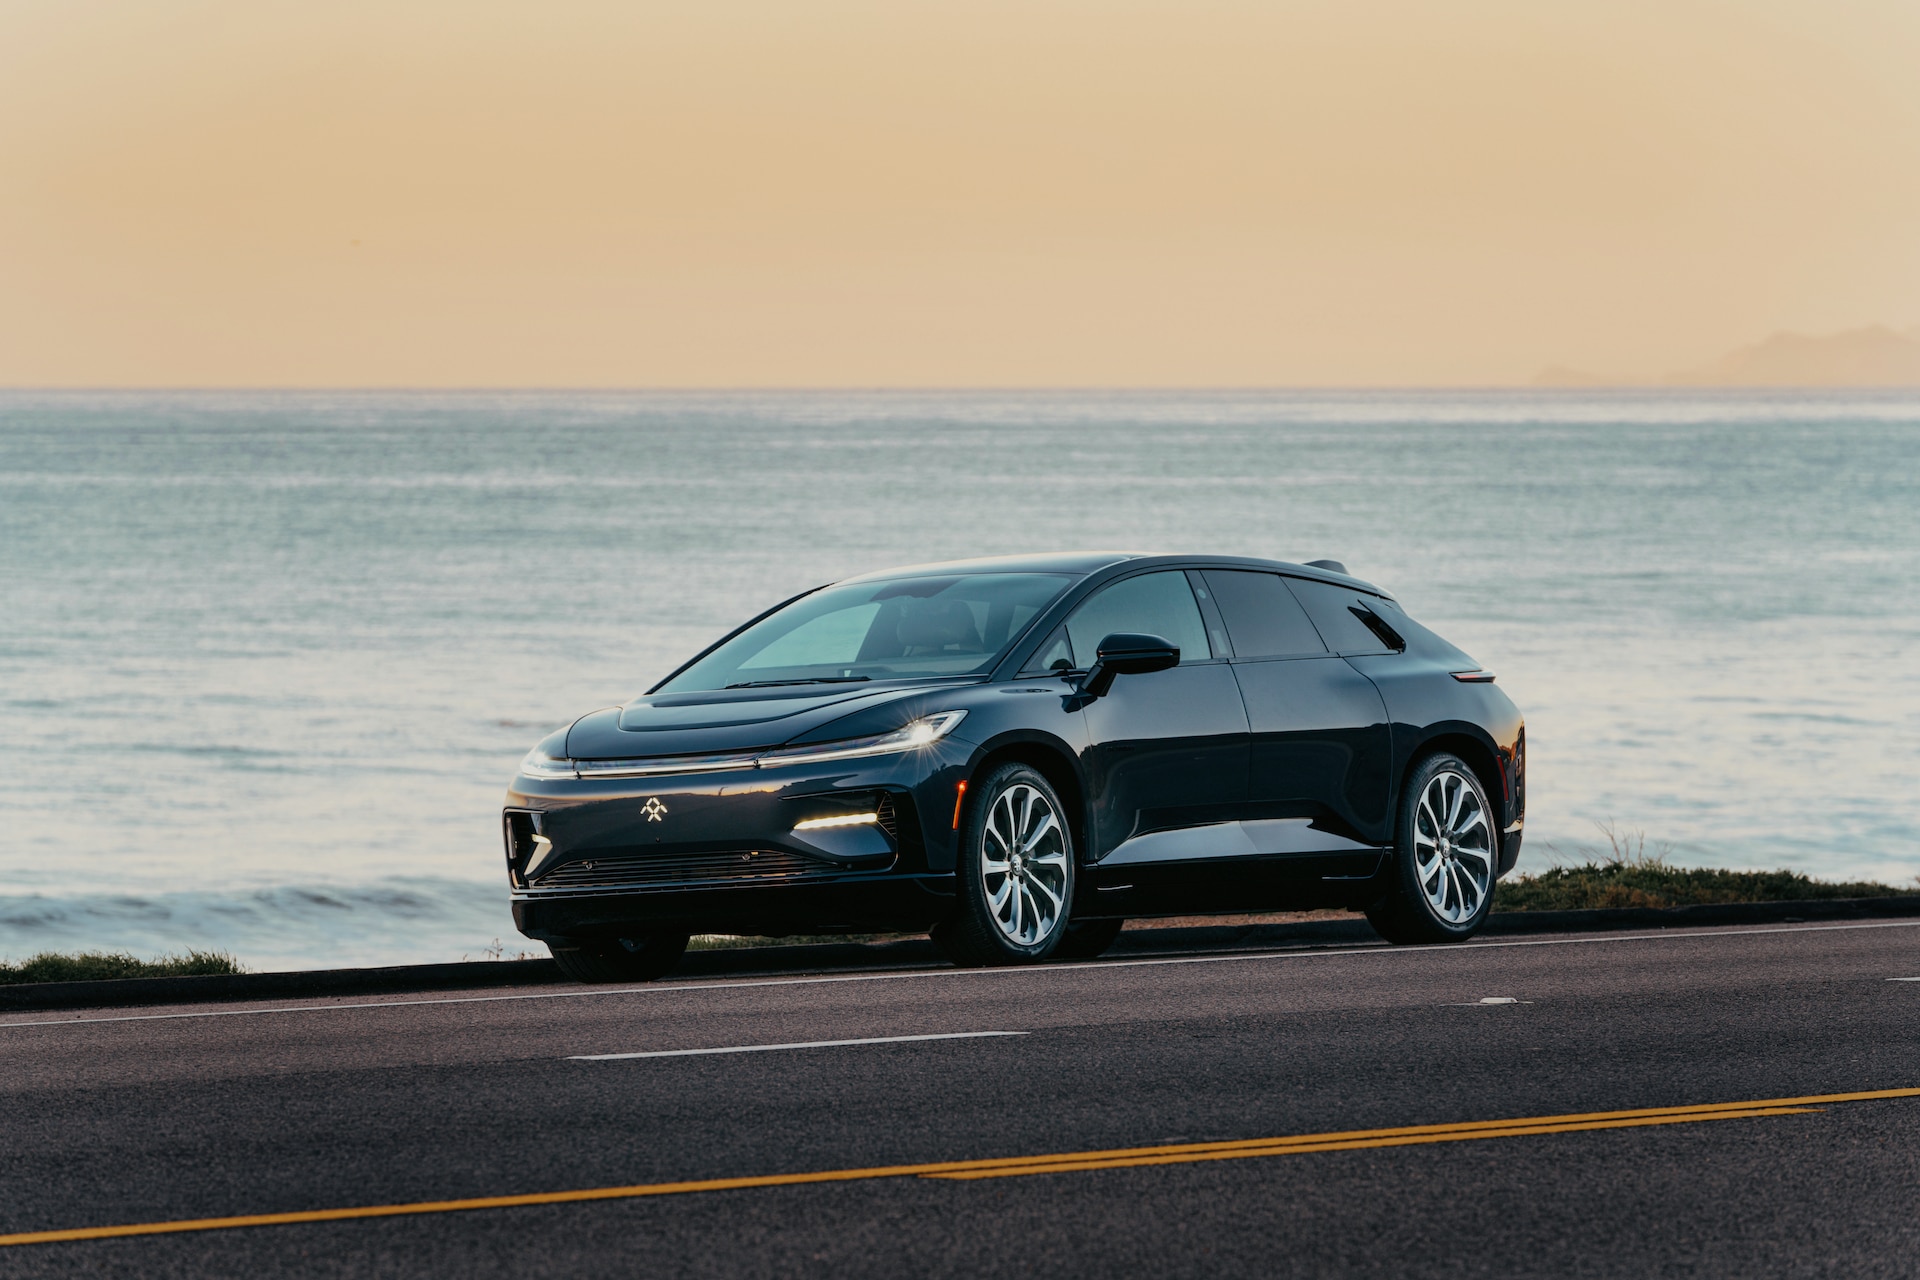 Faraday Future Ships Latest Electric Vehicle to China for Market Testing and Validation